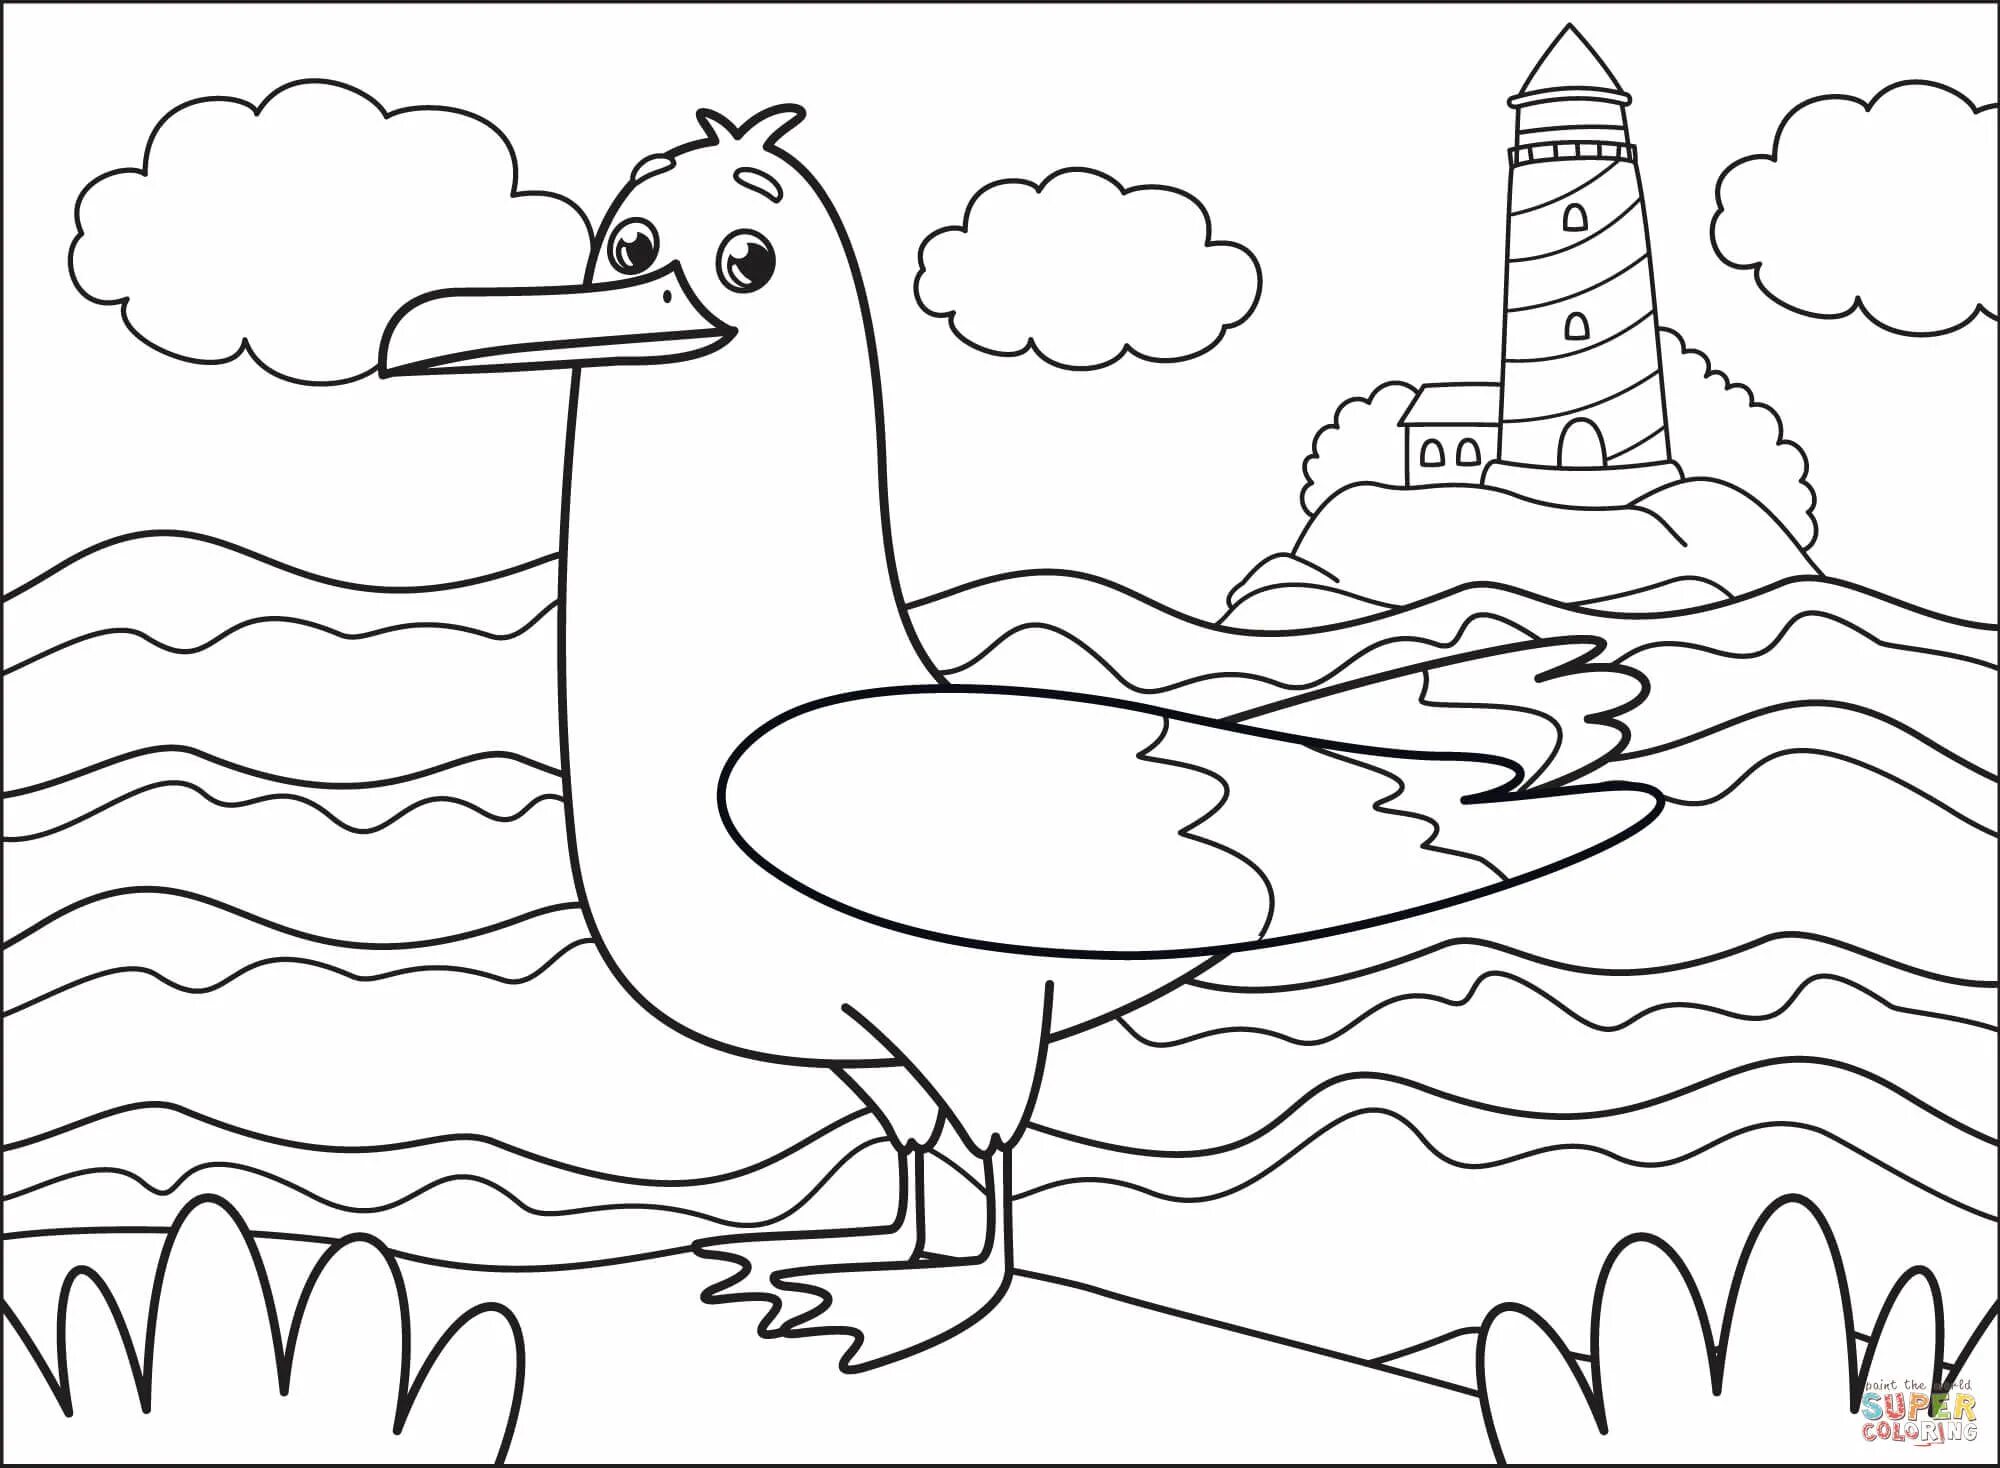 Colored seagull coloring book for kids